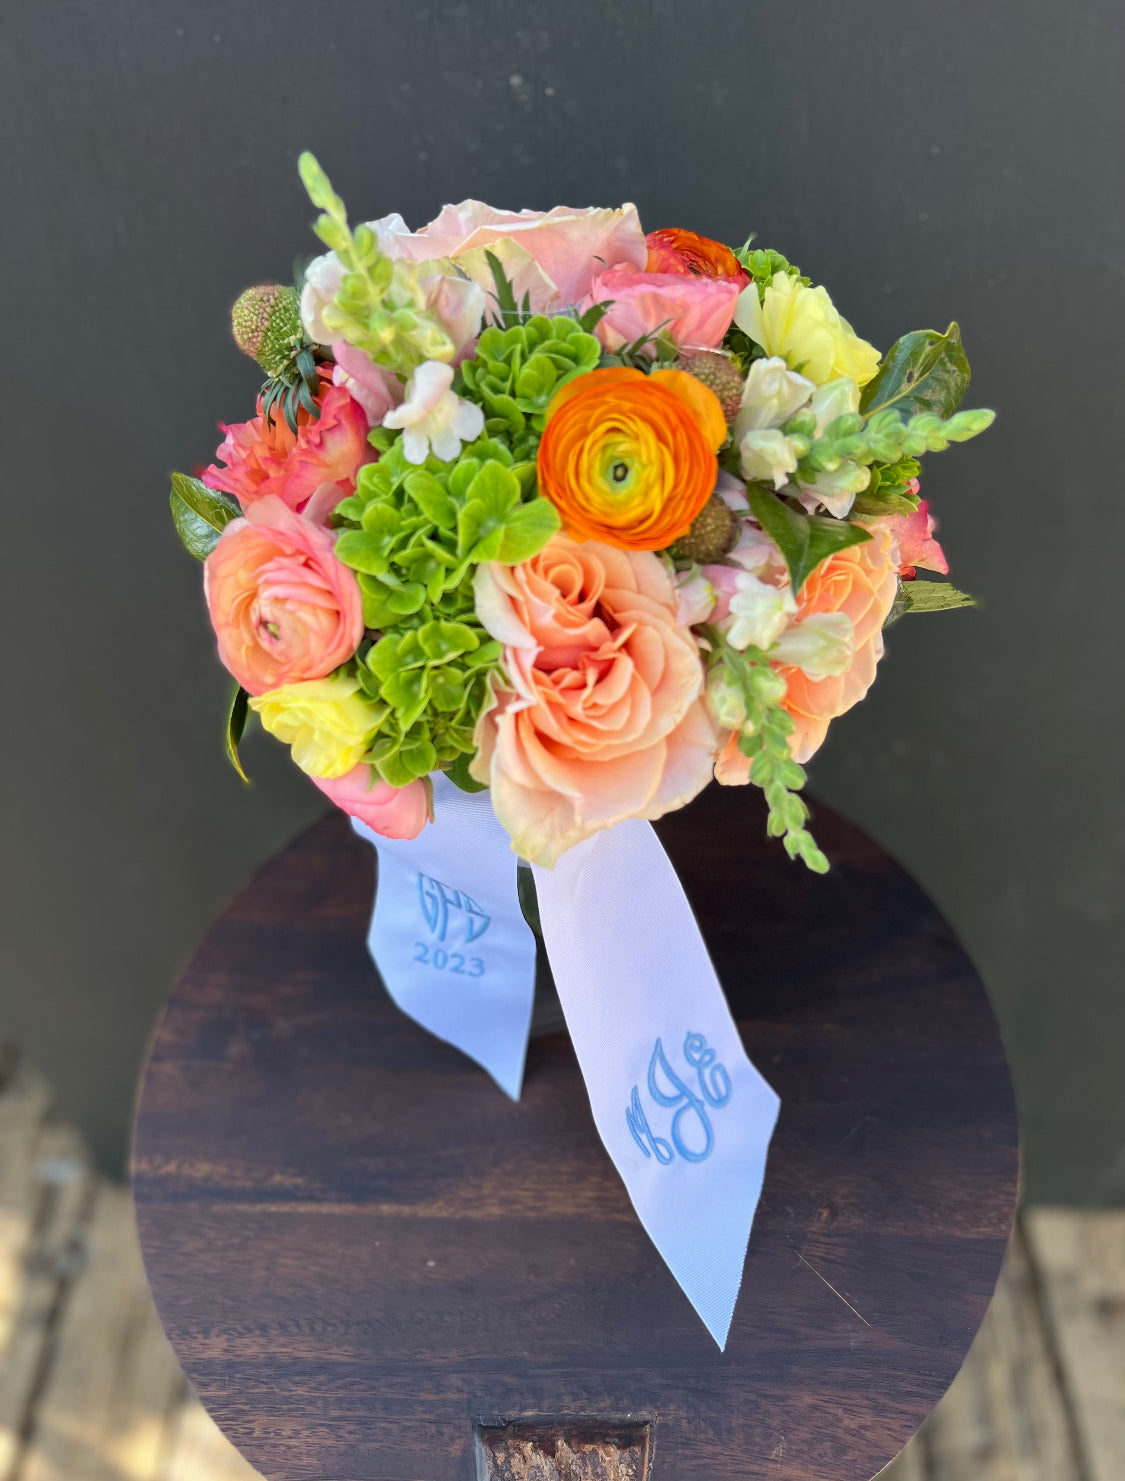 Personalized Ribbon for Bouquet - Charlotte's Web Monogramming & Gifts